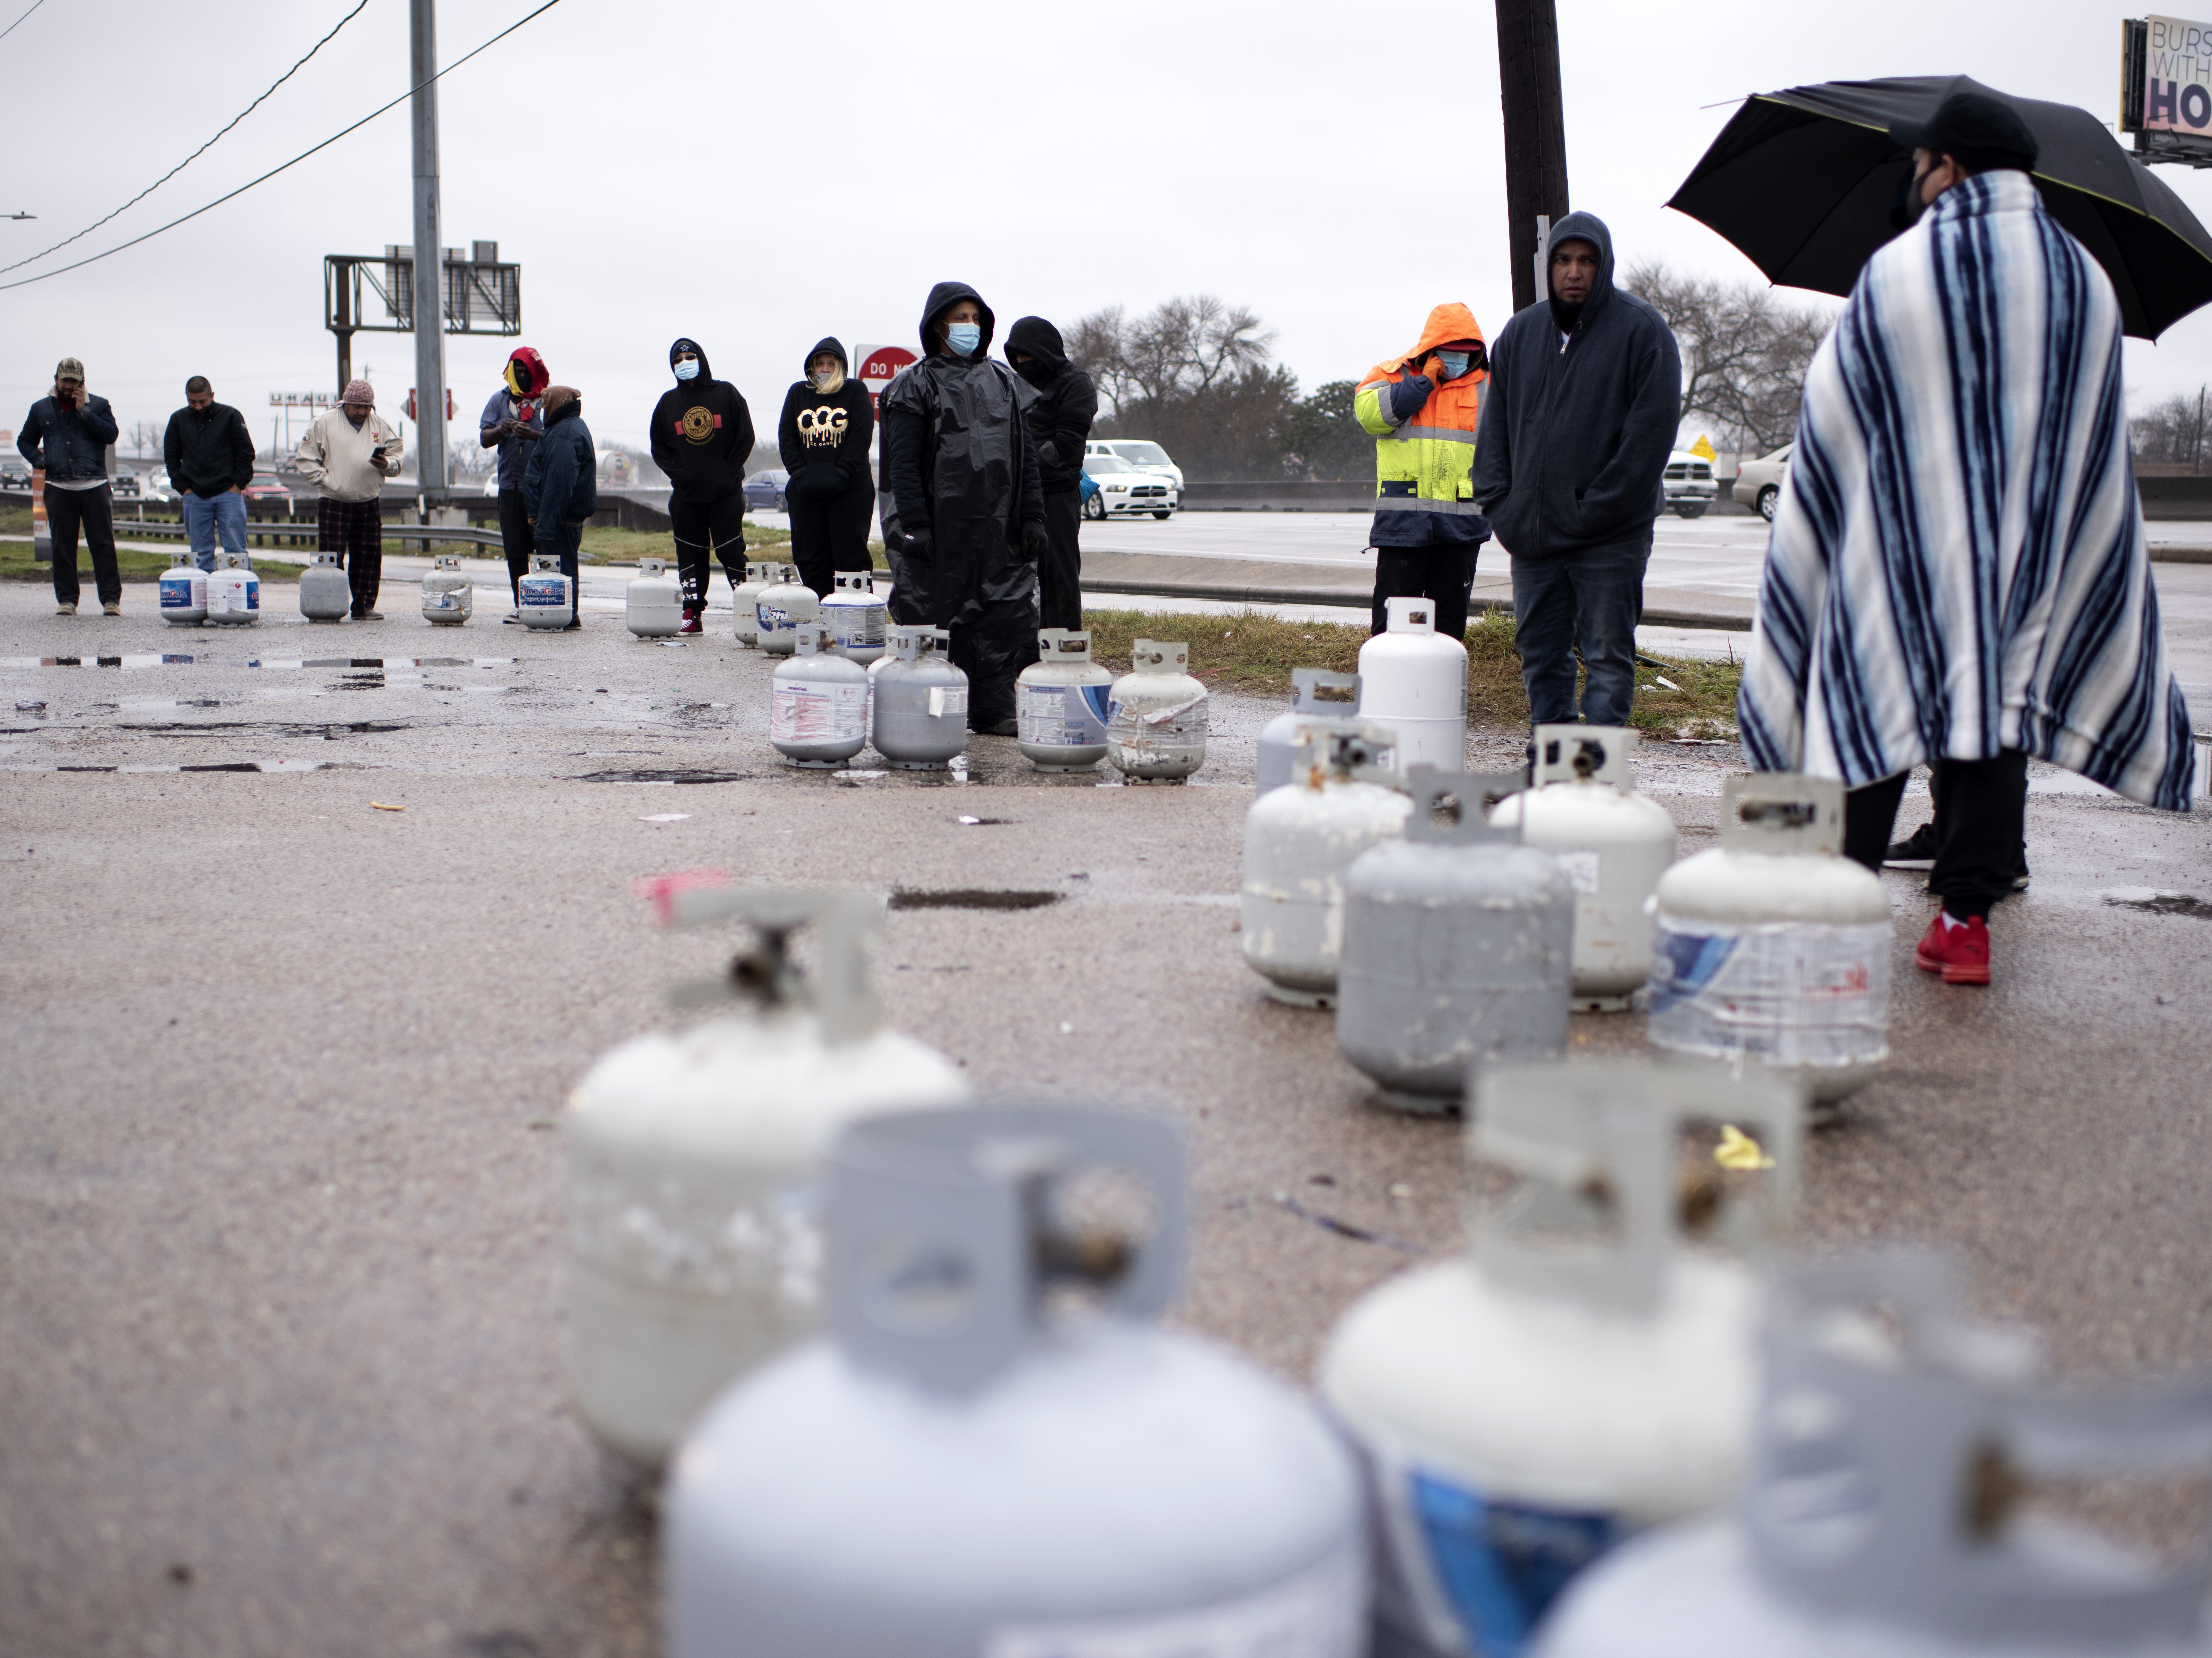 People in Houston wait in line to fill their propane tanks on Wednesday amidst widespread power outages related to the winter storm. Cases of carbon monoxide poisoning in the state have increased in recent days, with officials attributing most to the improper use of heating devices like charcoal grills and portable generators. CREDIT: Mark Felix/The Washington Post via Getty Images